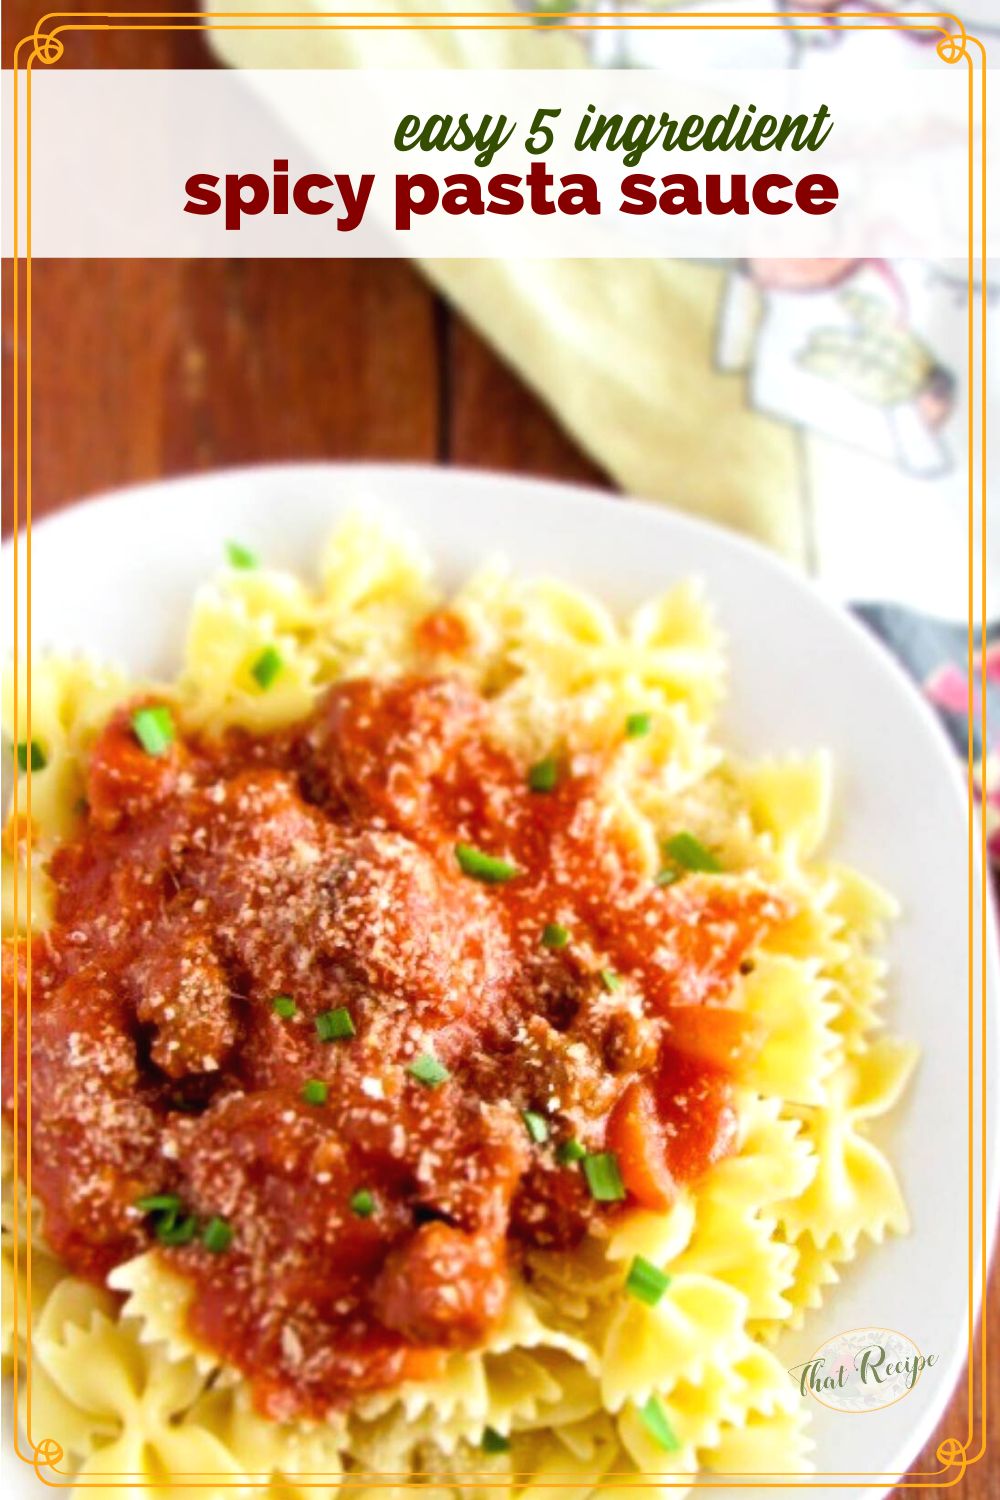 Bow tie pasta on a plate covered in sausage pasta sauce with text overlay "Easy 5 Ingredient Pasta Sauce"